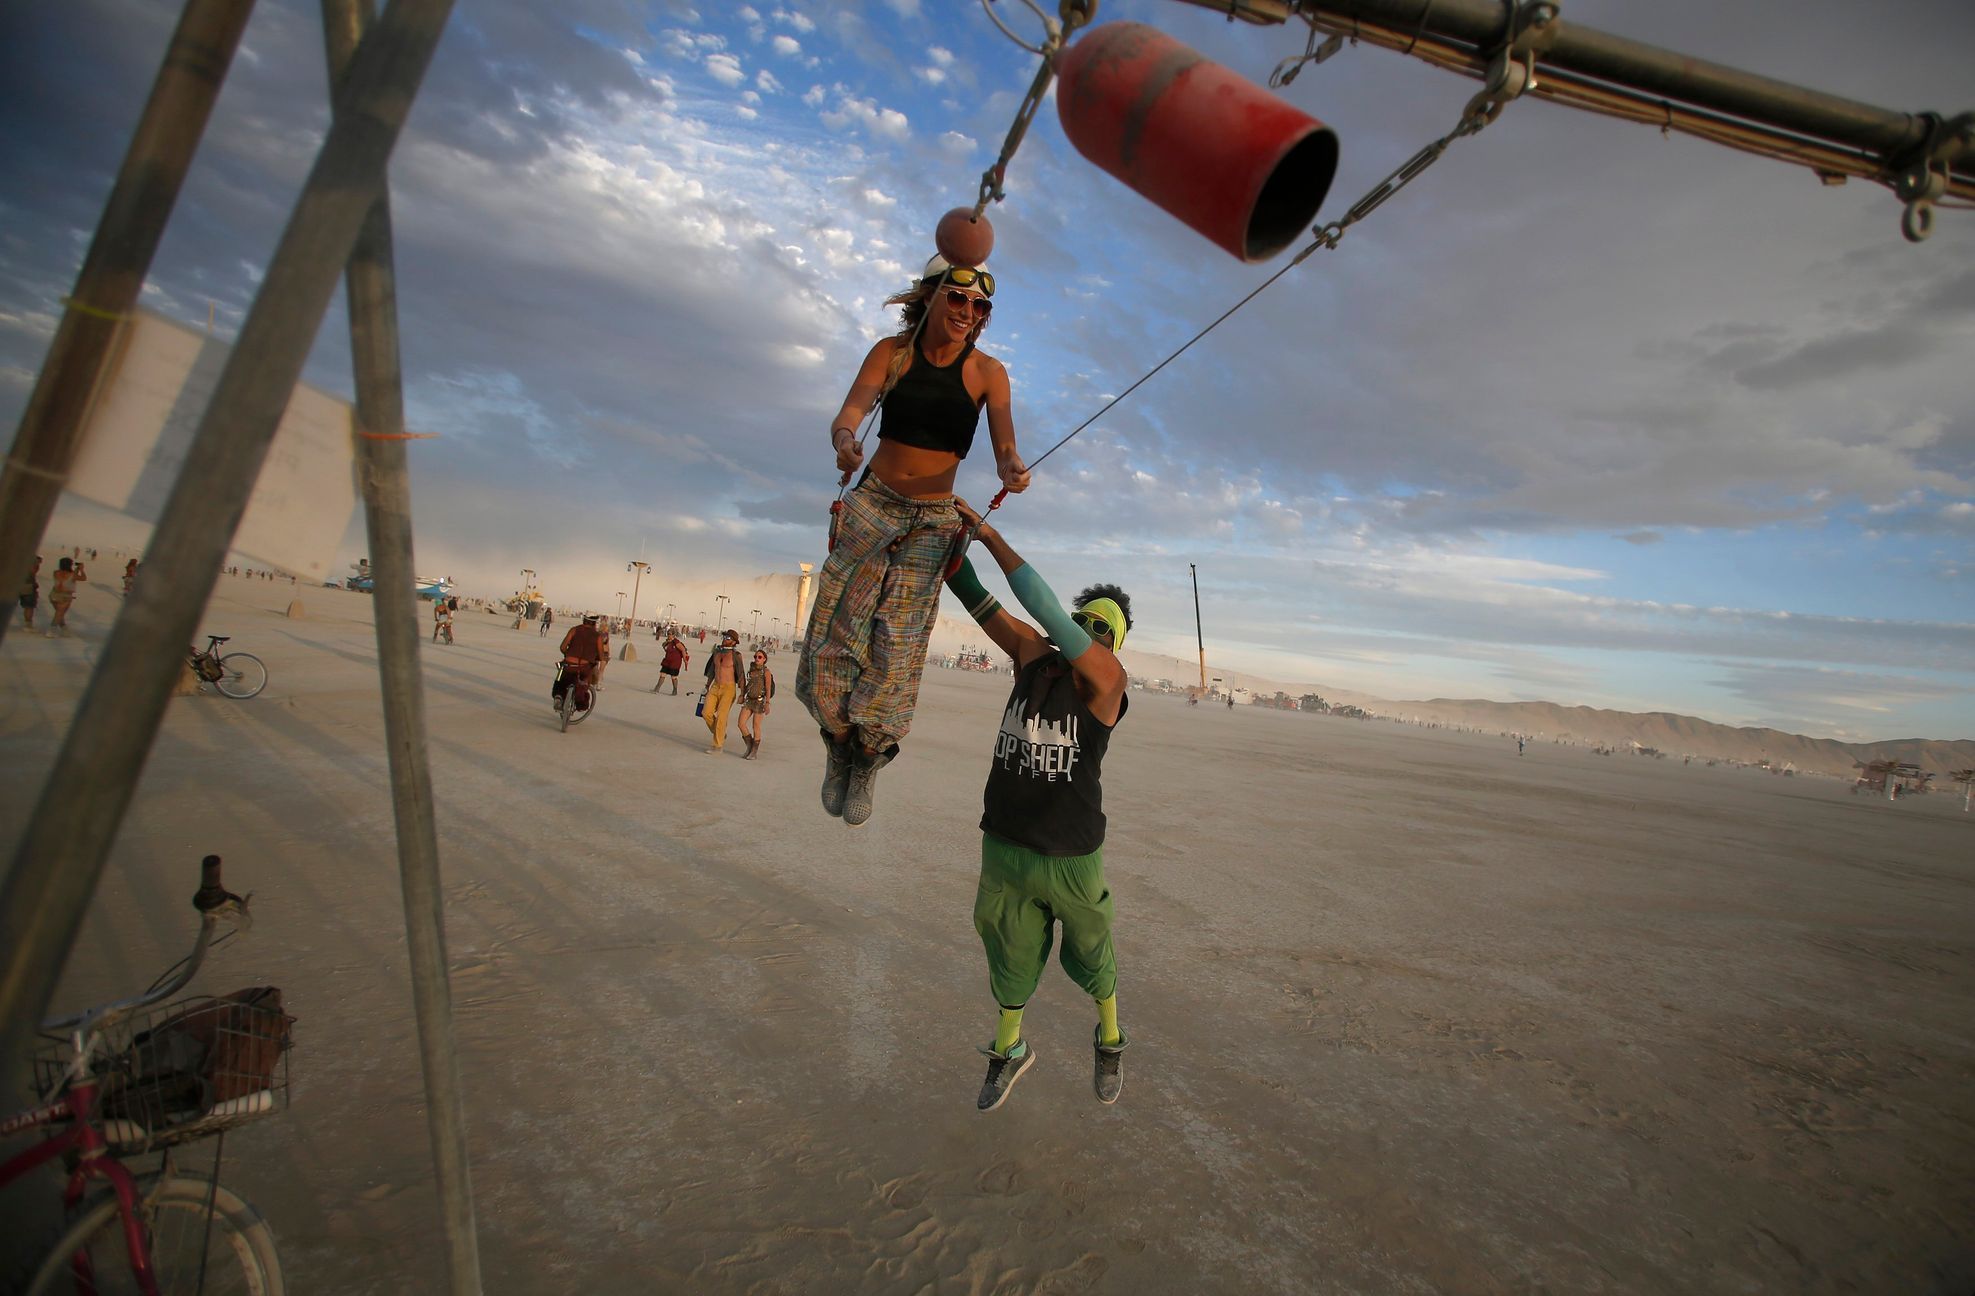 Gwen Barker and Rezwan Khan play on a swing art installation during the Burning Man 2014 &quot;Caravansary&quot; arts and music festival in the Black Rock Desert of Nevada